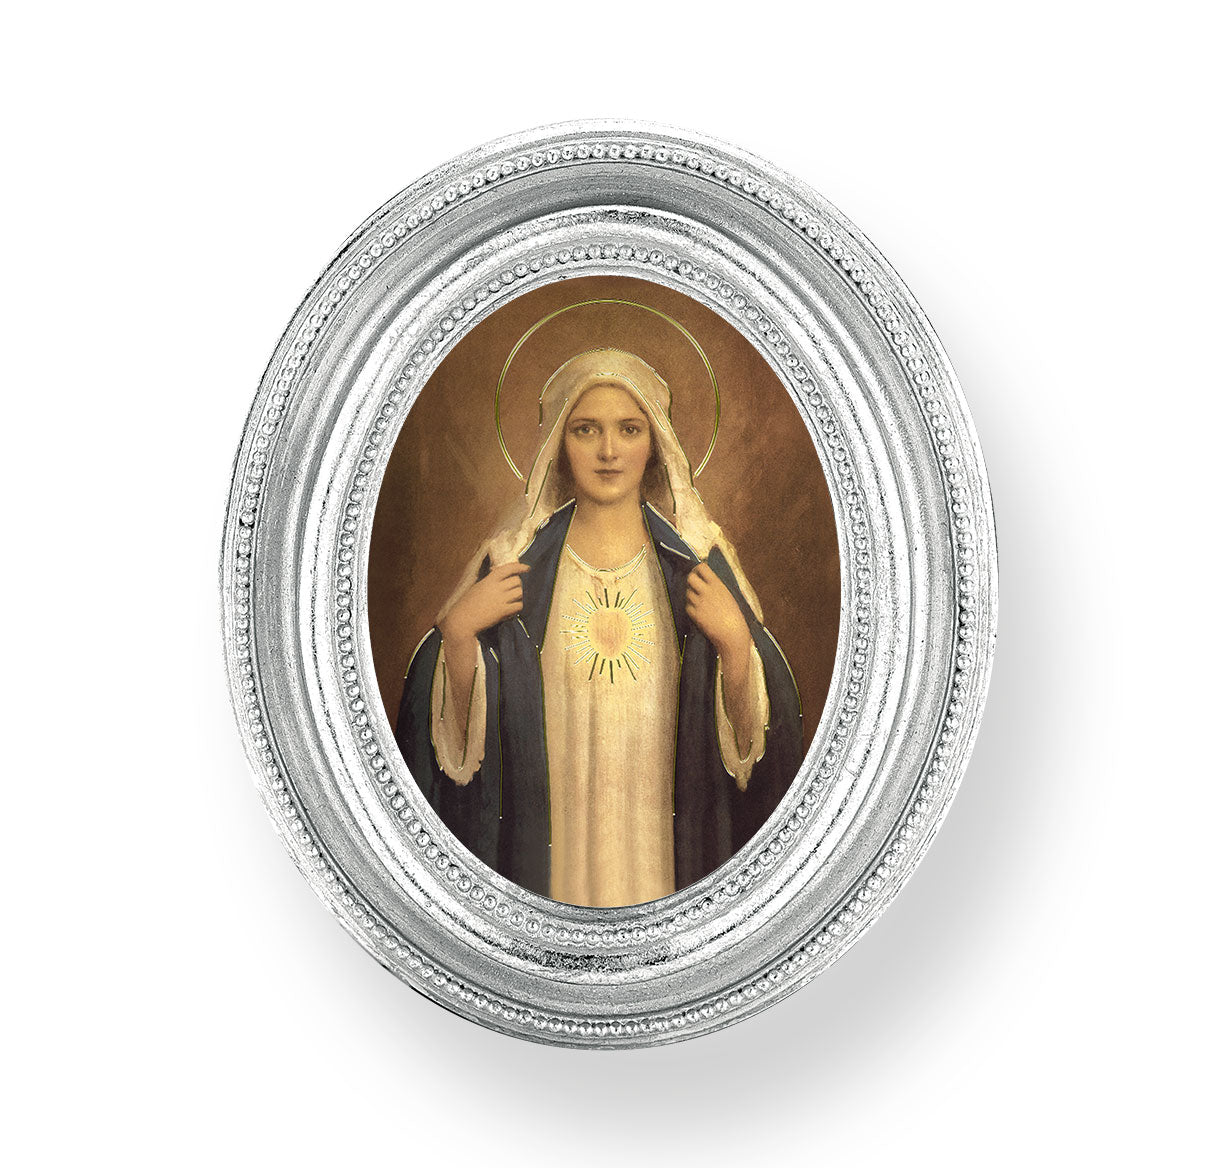 Immaculate Heart of Mary Silver Framed Print